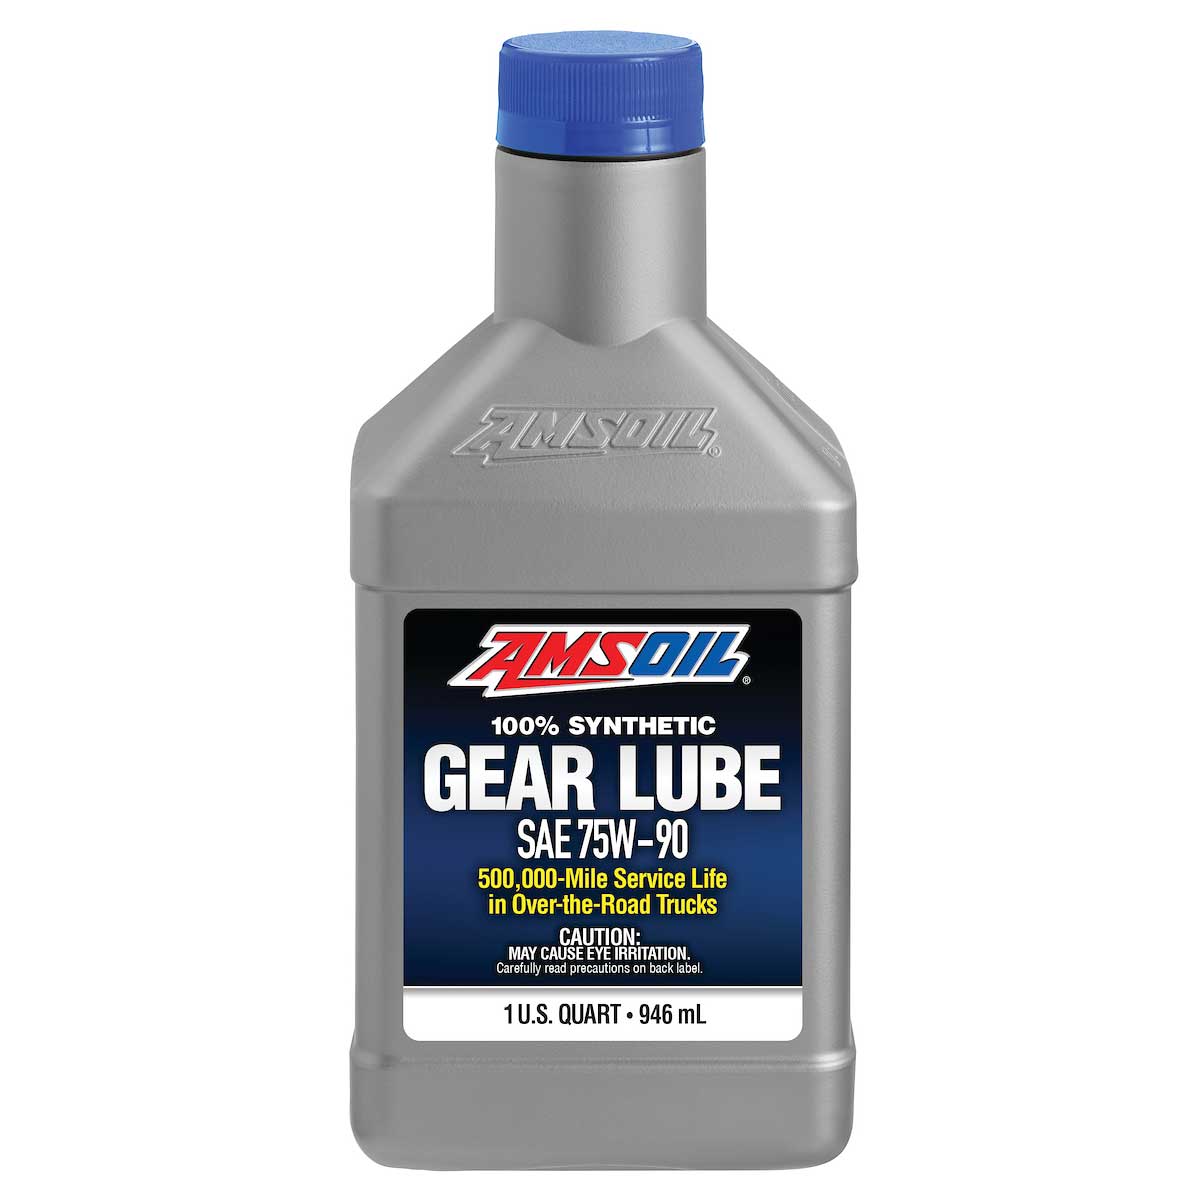 75W-90 Long Life Synthetic Gear Lube